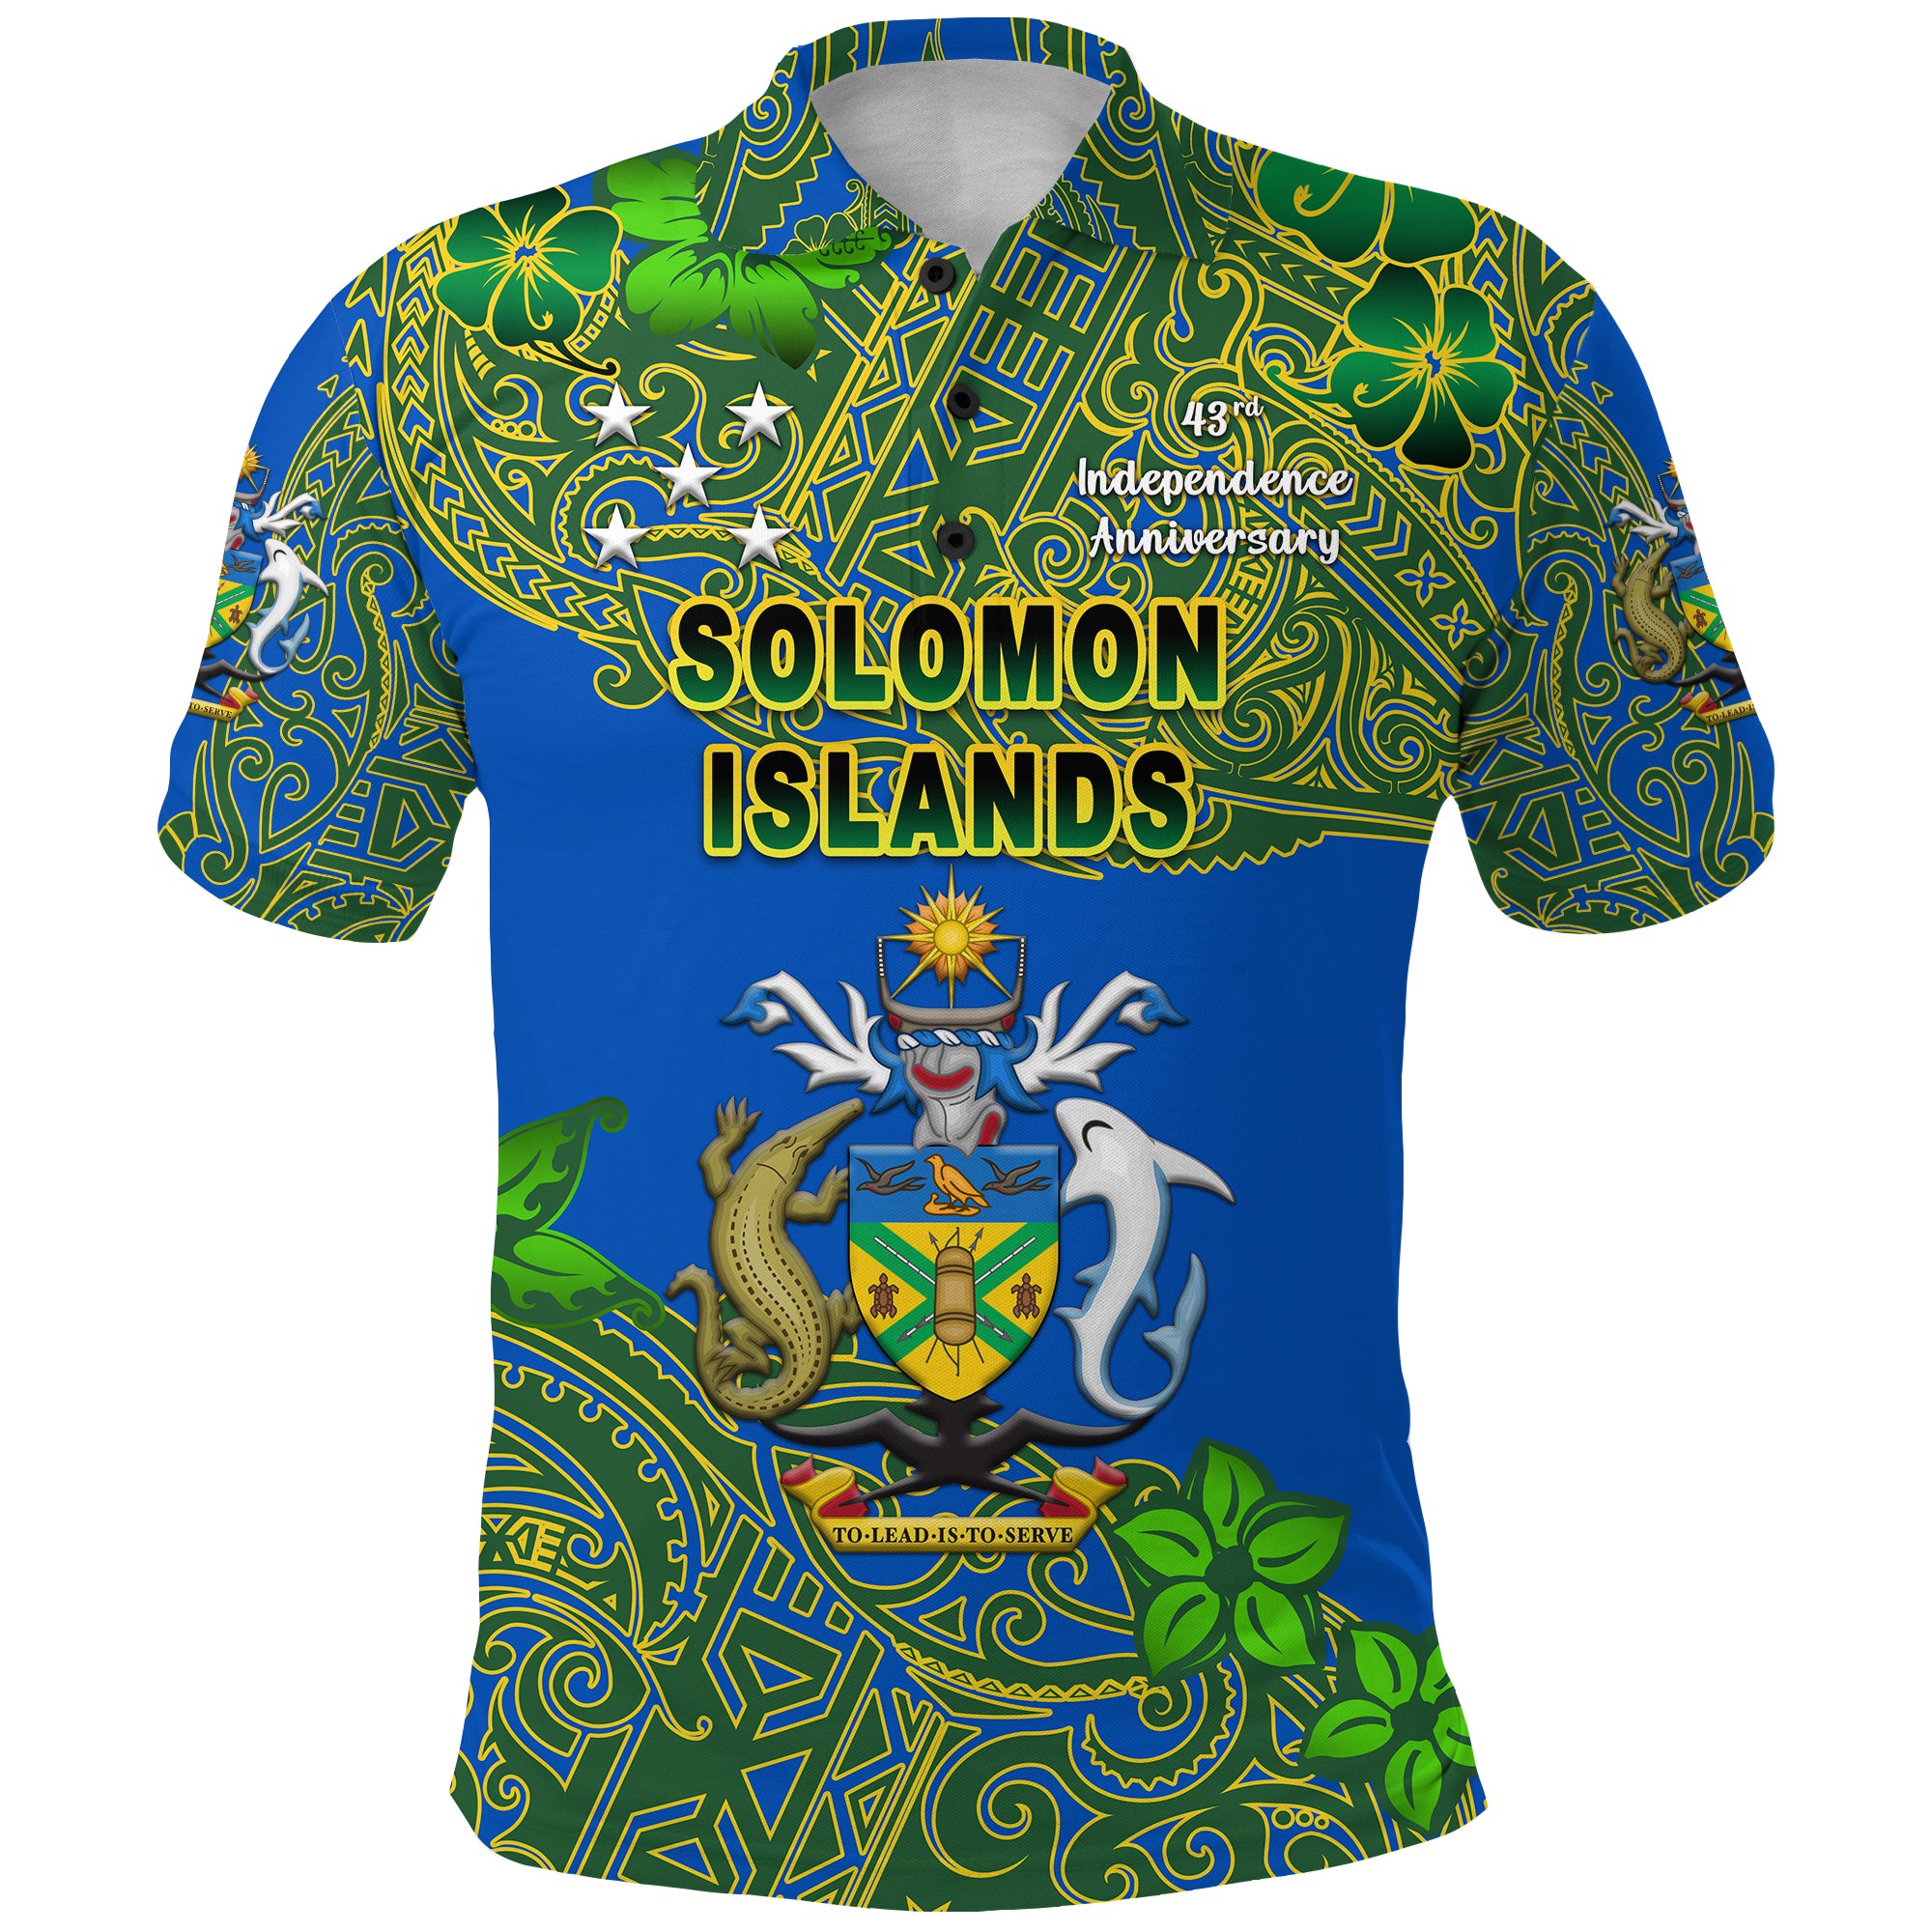 Solomon Islands Polo Shirt 43rd Independence Anniversary Unique Vibes LT8 Unisex Blue - Polynesian Pride